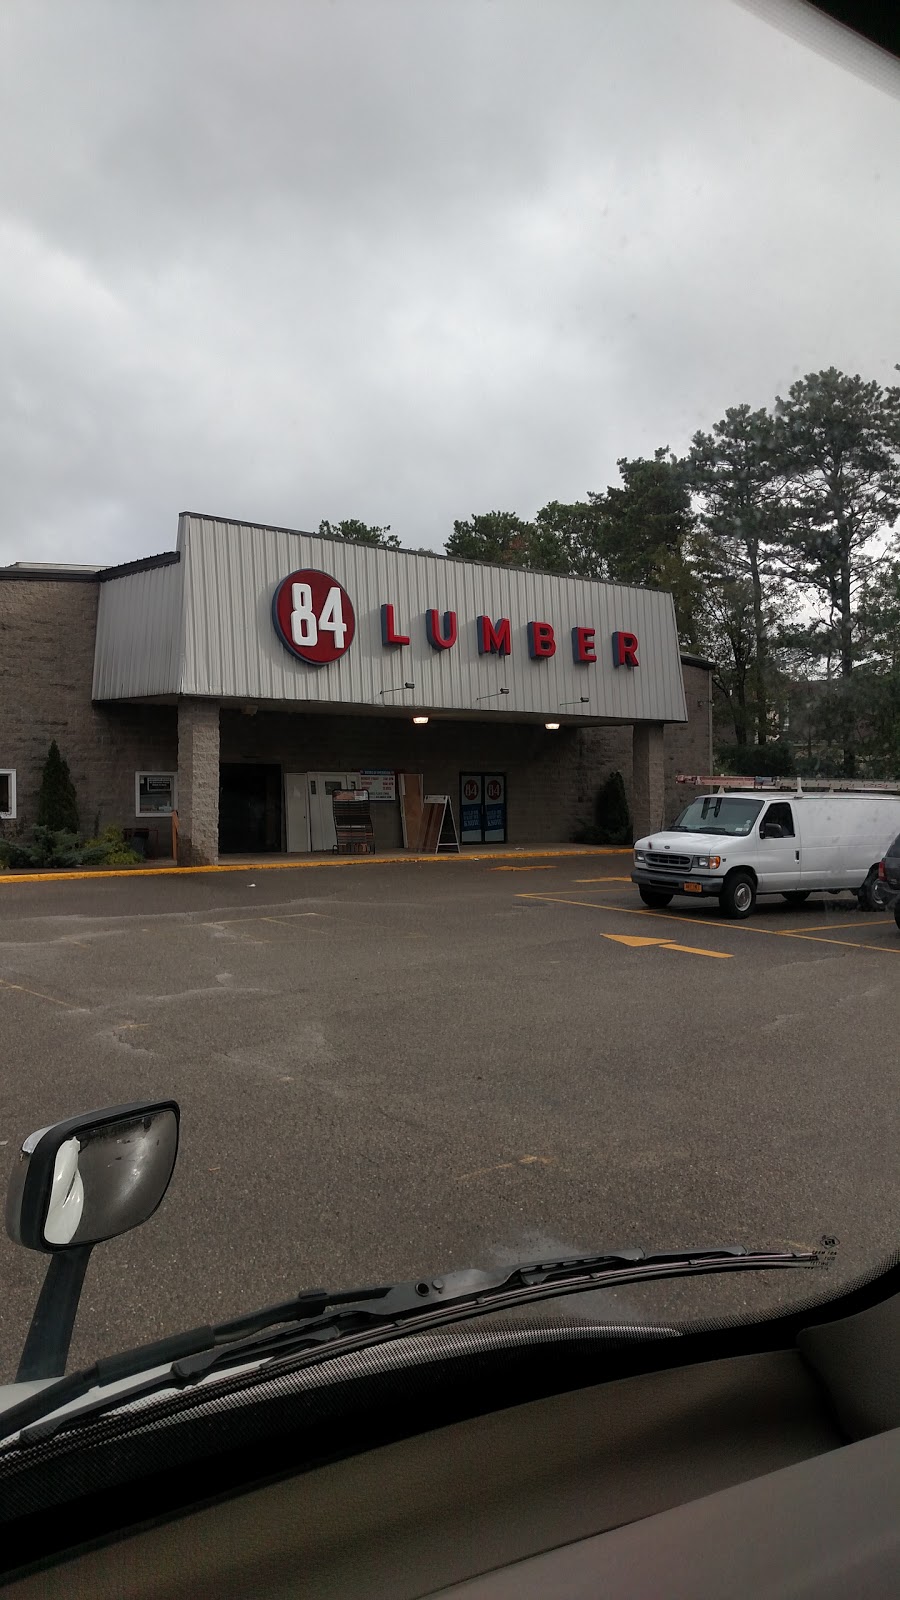 84 Lumber | 155 Sills Rd, Patchogue, NY 11772 | Phone: (631) 654-8433